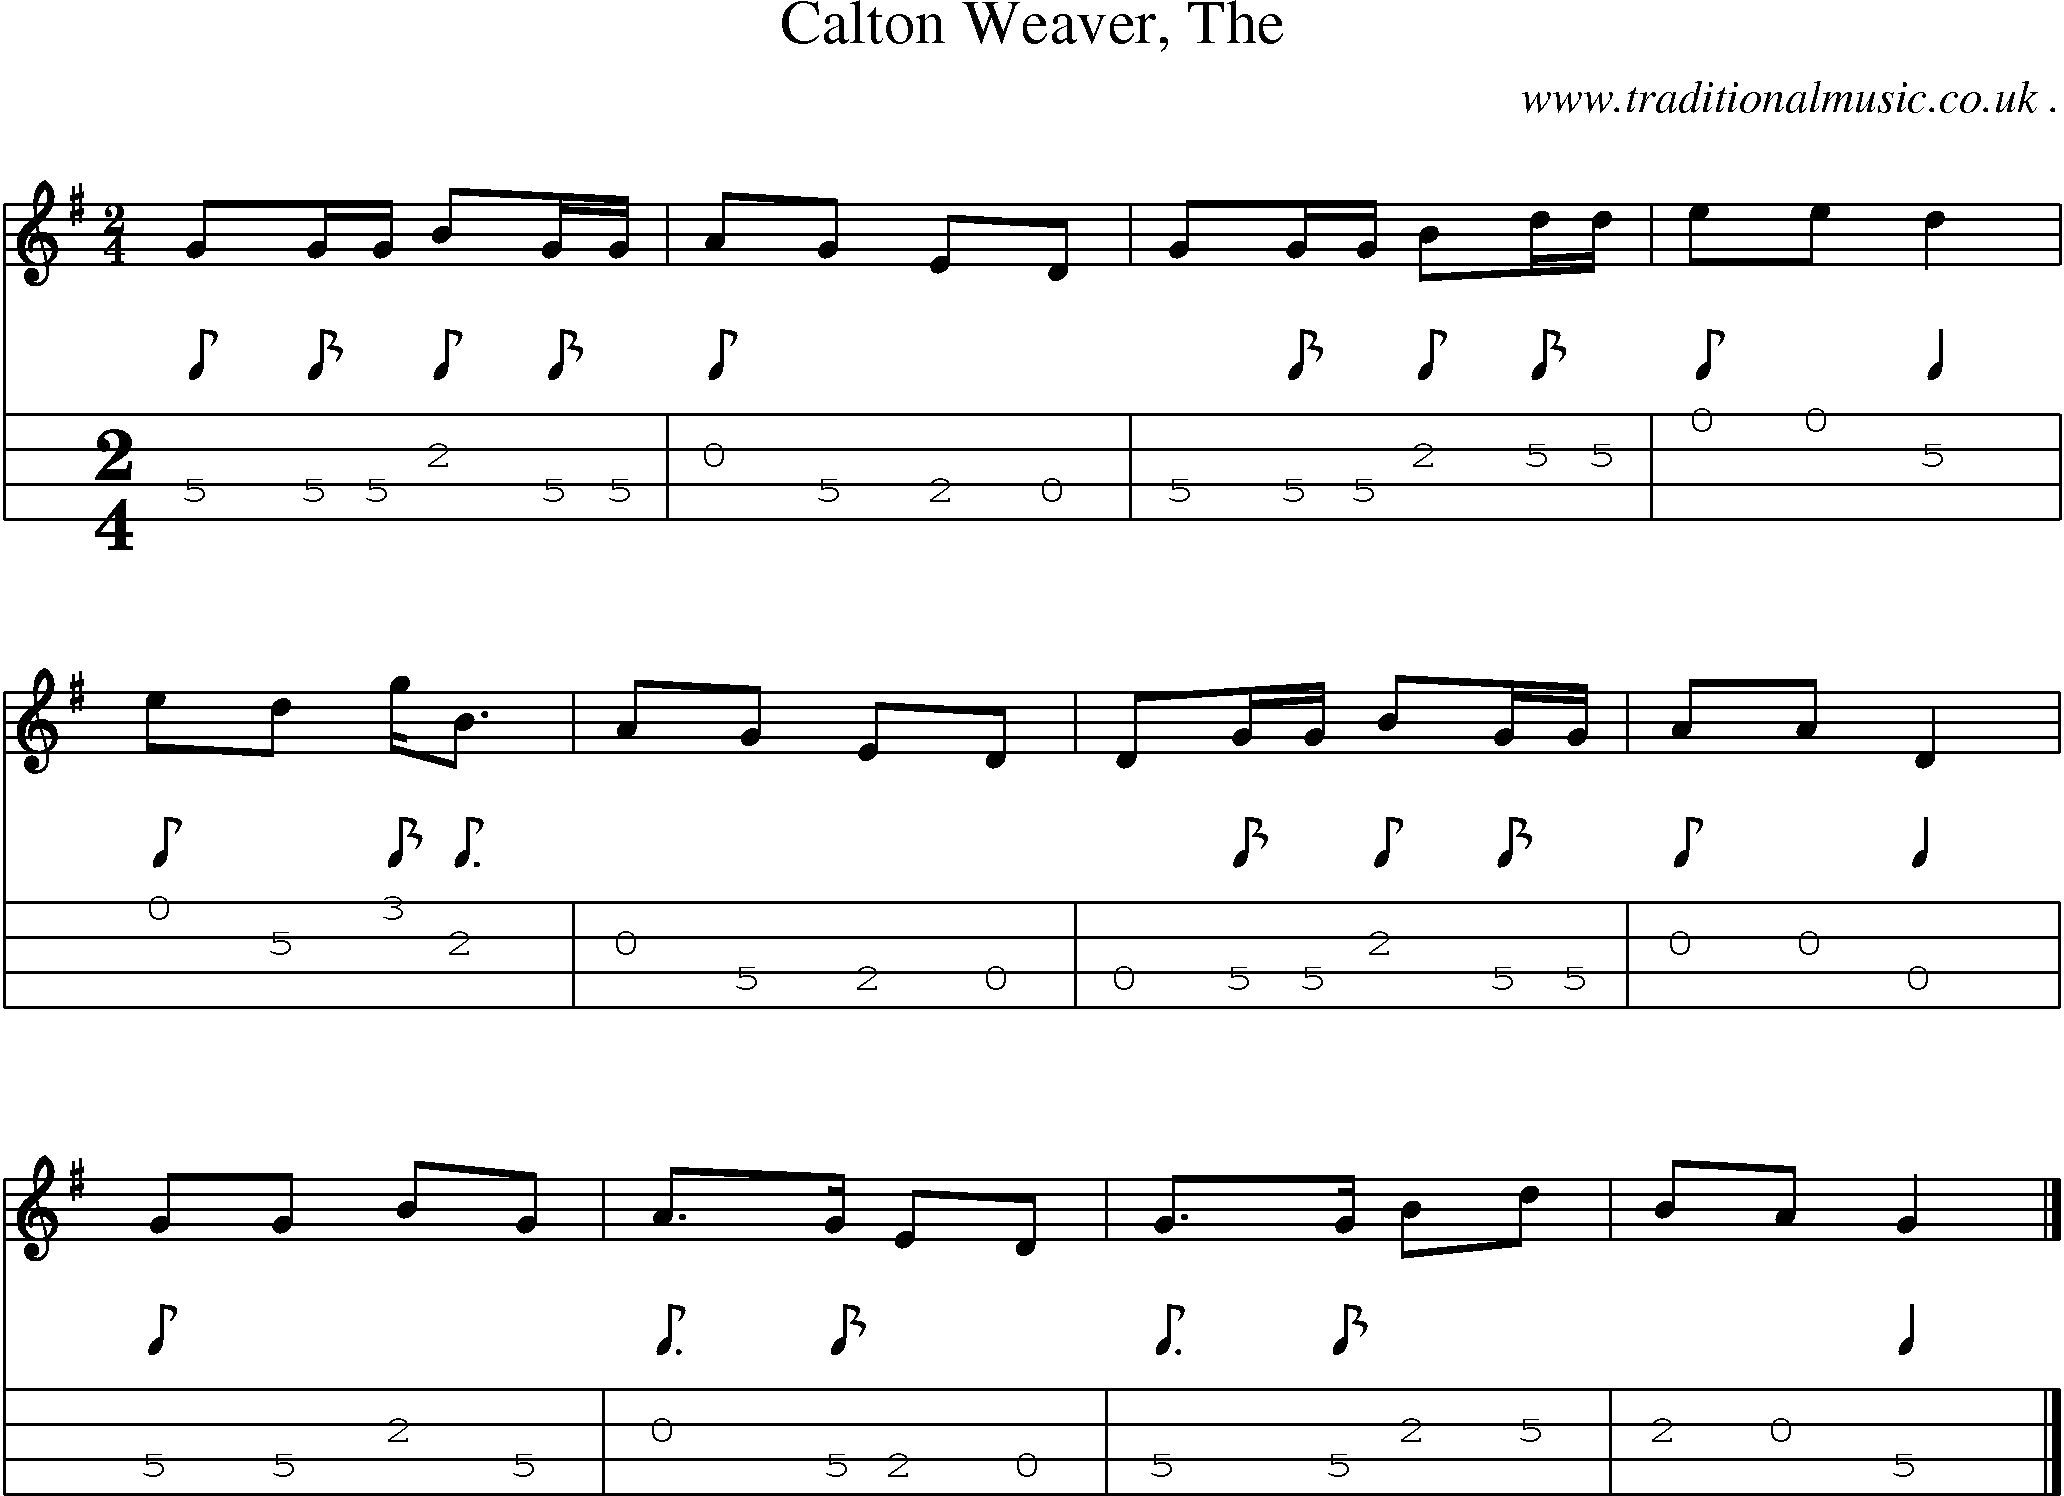 Sheet-music  score, Chords and Mandolin Tabs for Calton Weaver The